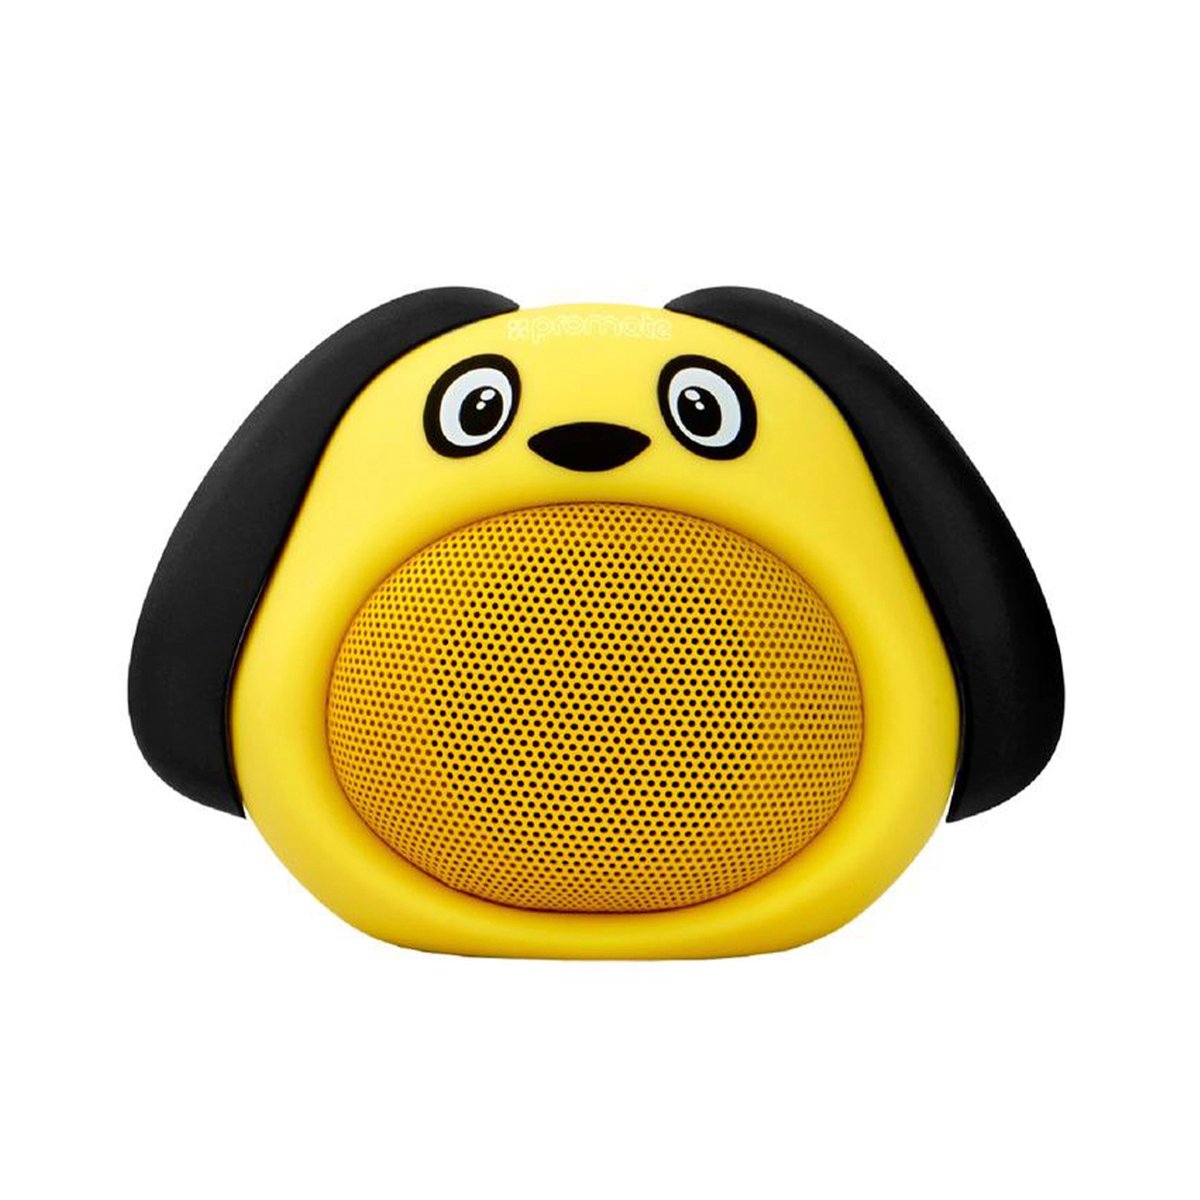 PROMATE Bluetooth v4.1 Dog Styled Mini Speaker with Handsfree Support Assorted Colors(Available color will be shipped) (SNOOPY)